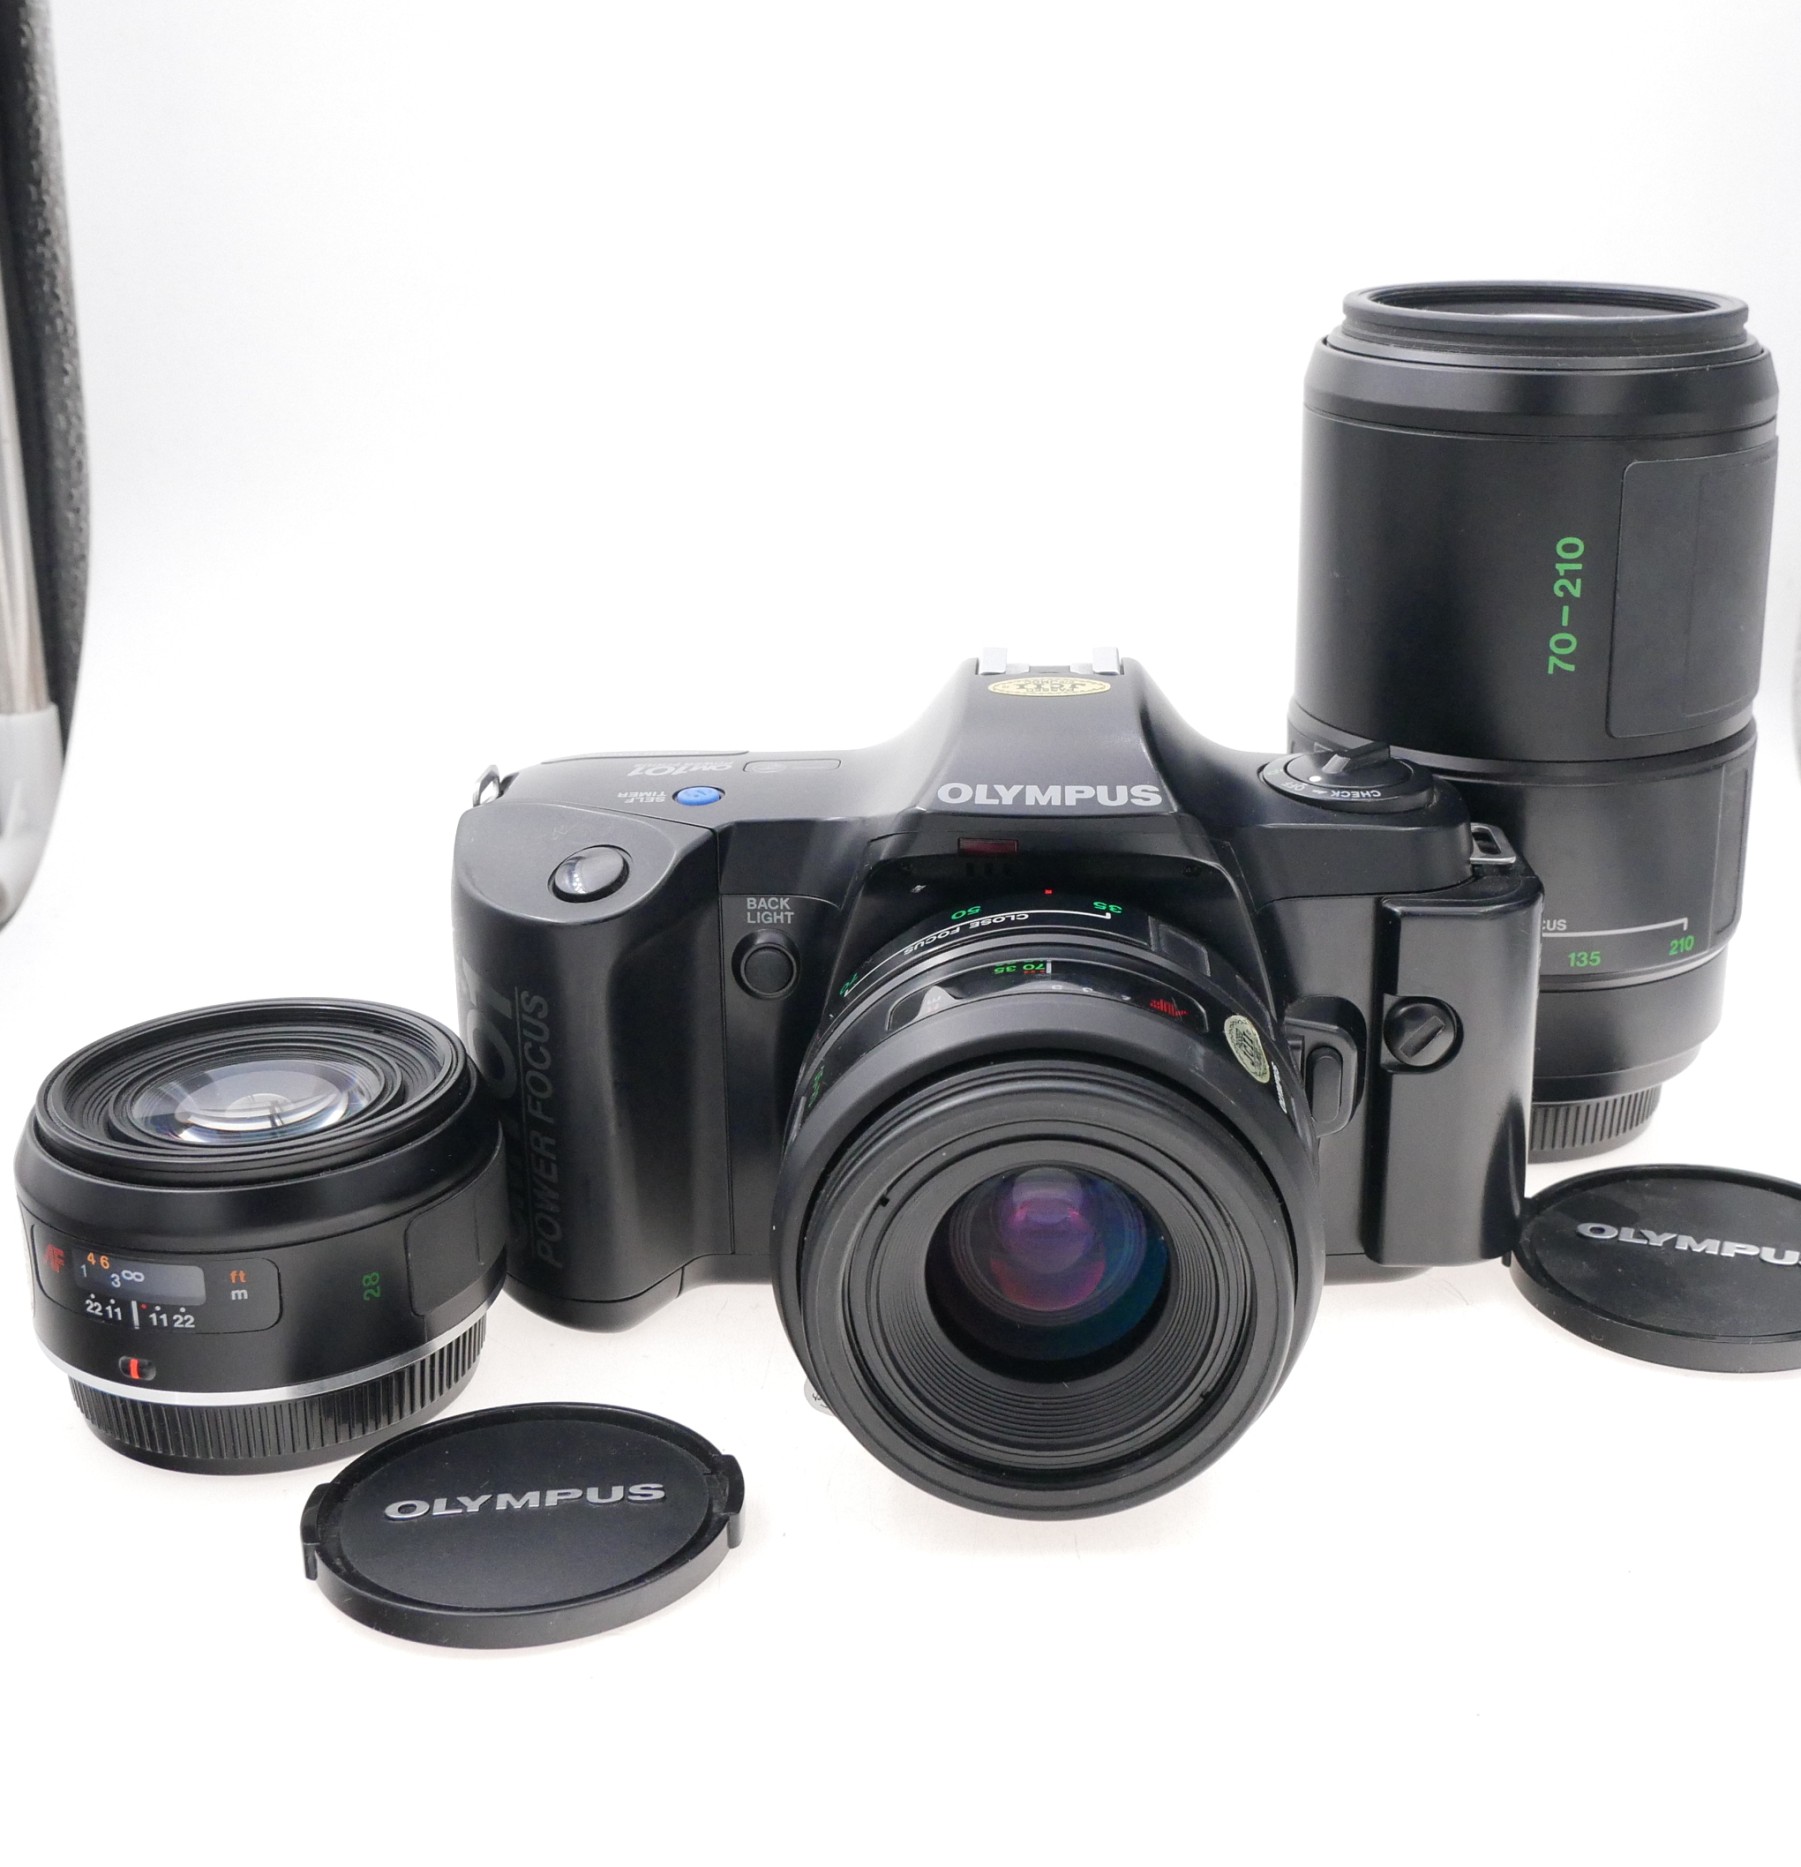 Olympus OM101 Kit: incl 101 Body, Manual Adapter 2, 28mm, 35-70, and 70-210 